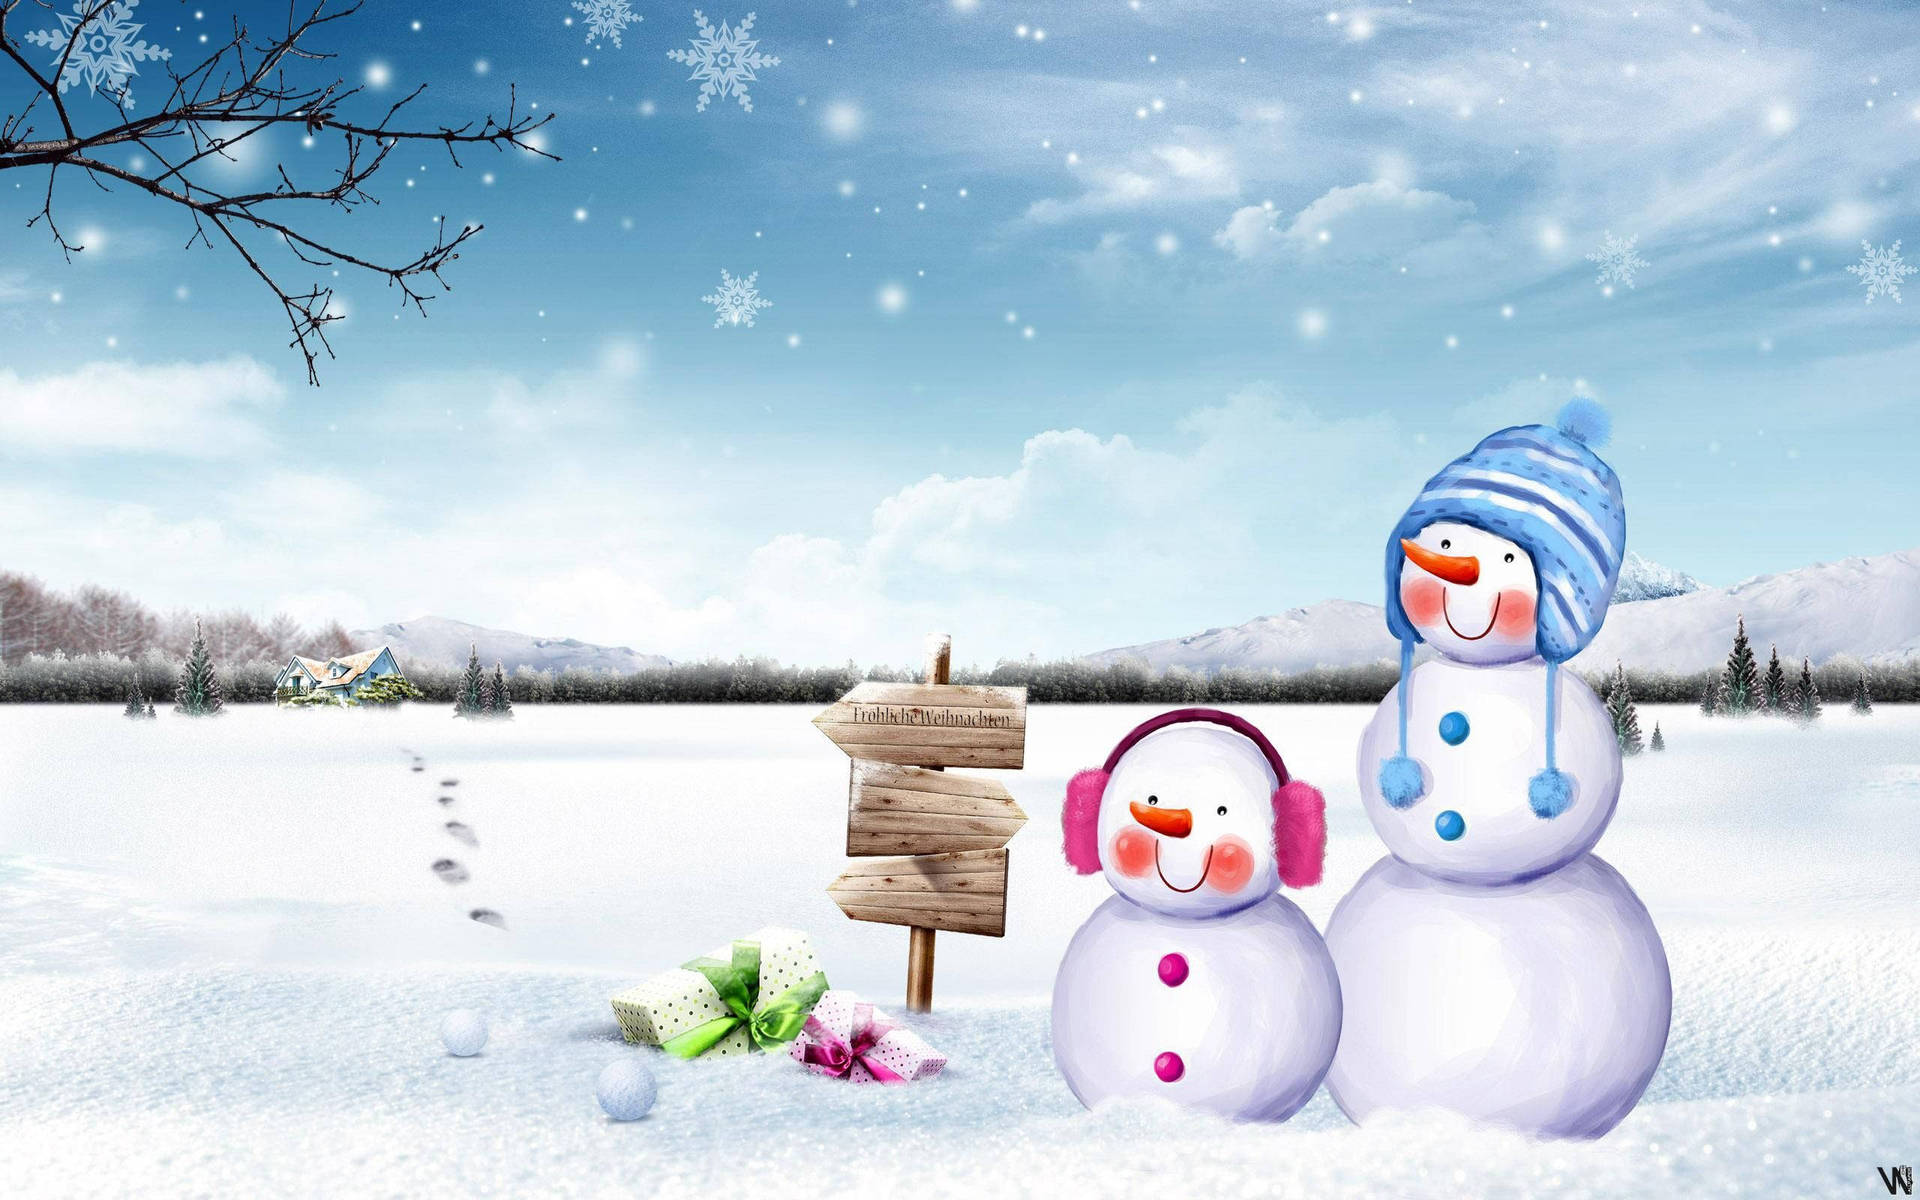 A cute snowman smiling on a winter day Wallpaper